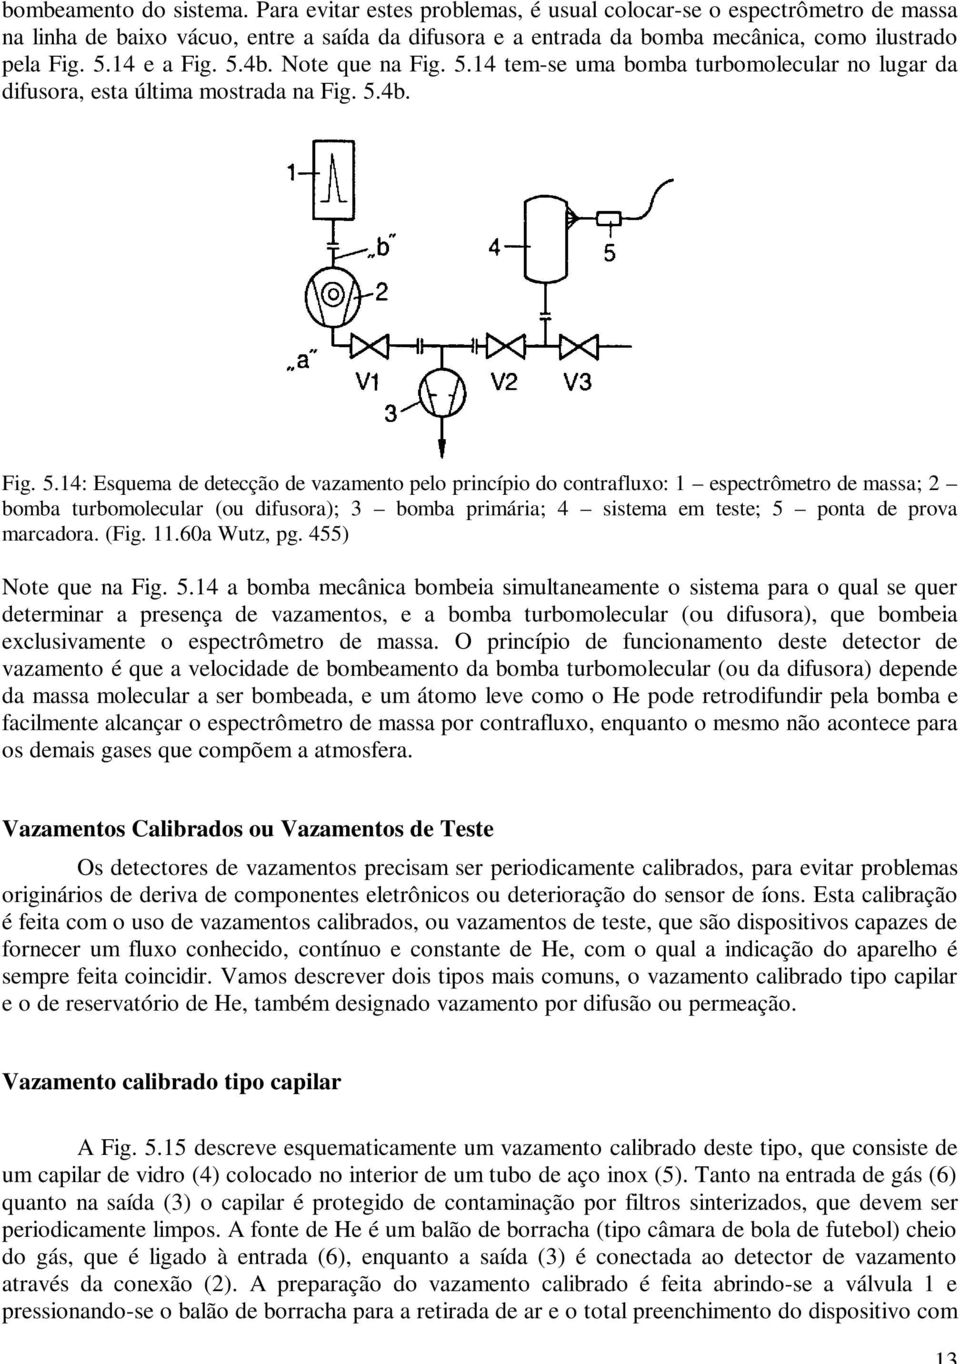 Note que na Fig. 5.